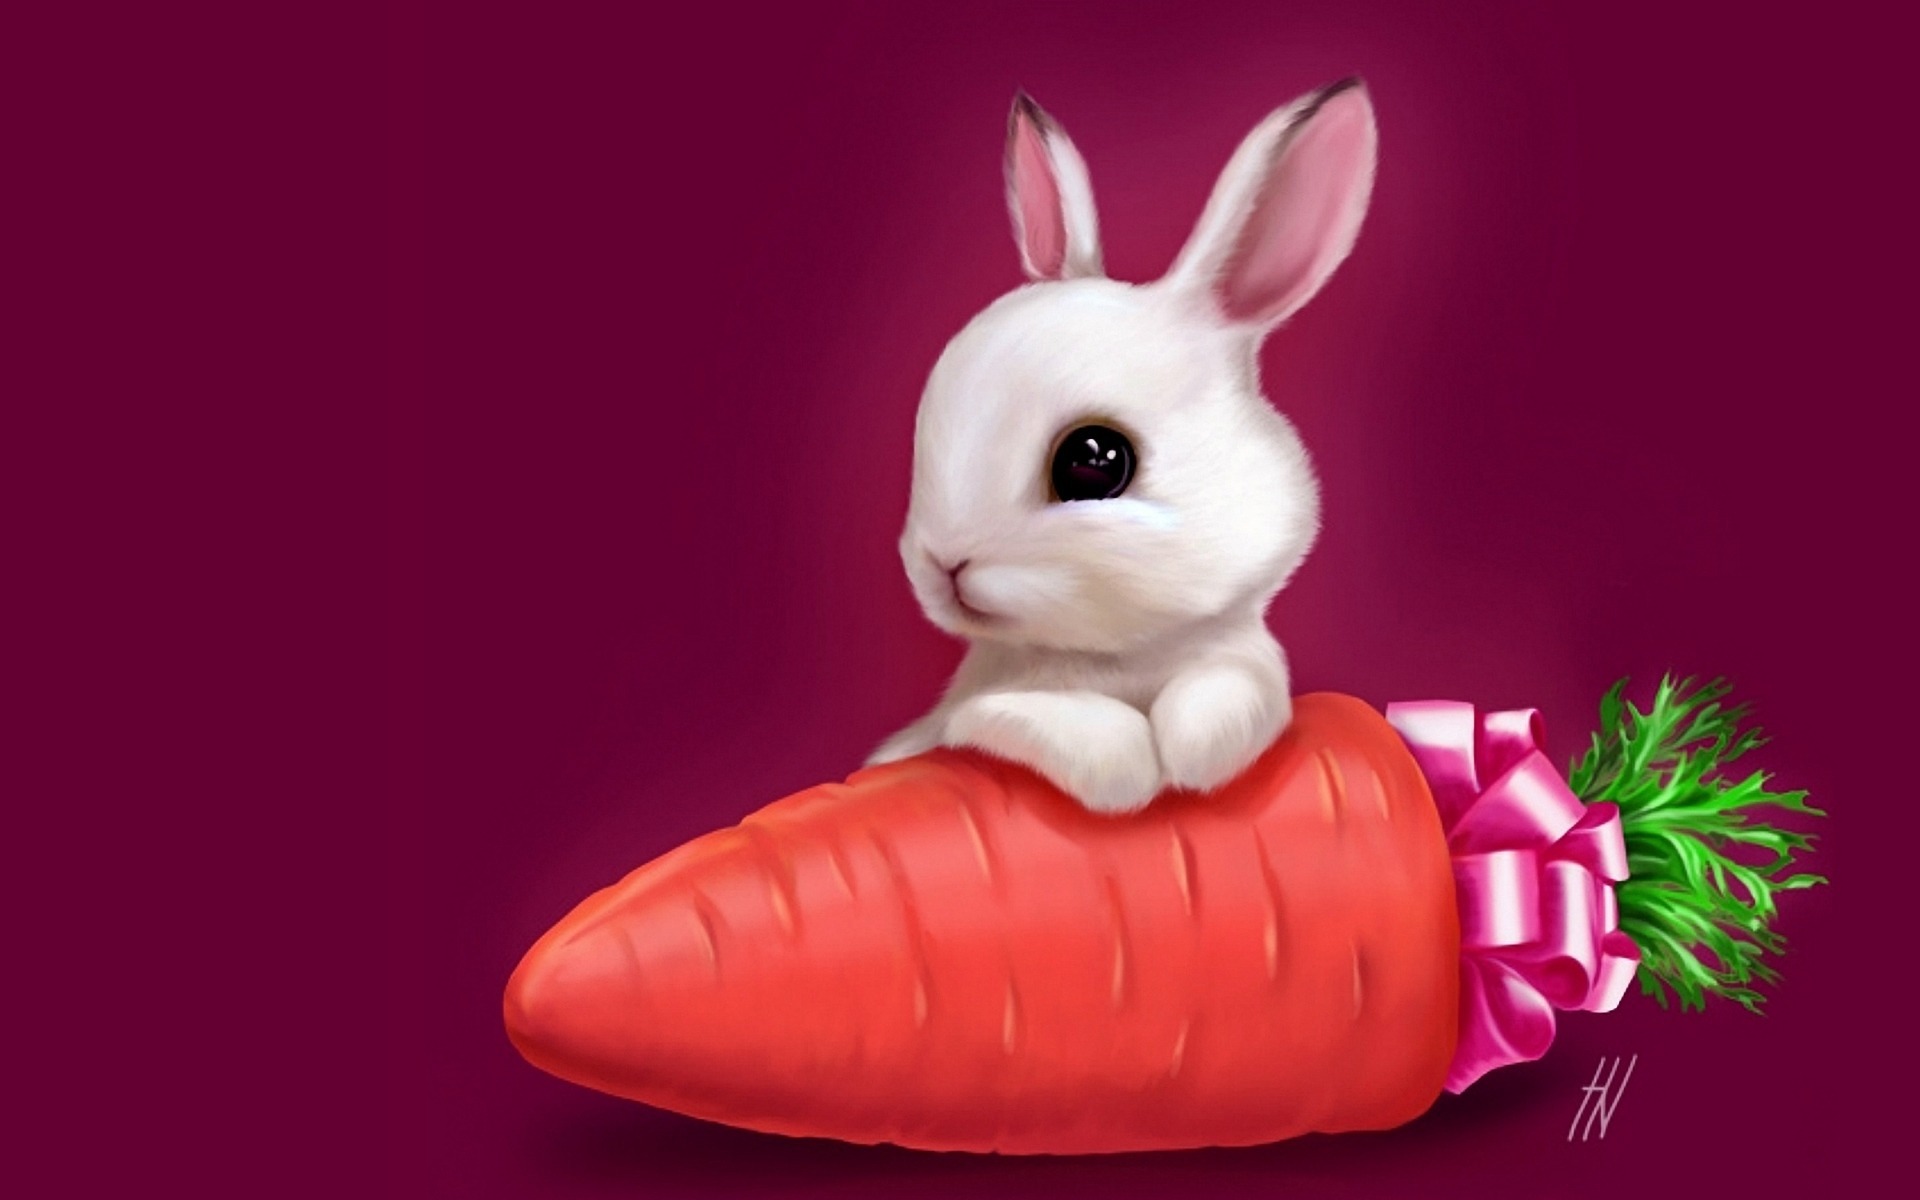 Bunny wallpaper with Christmas present a delicious carrot 1920x1200